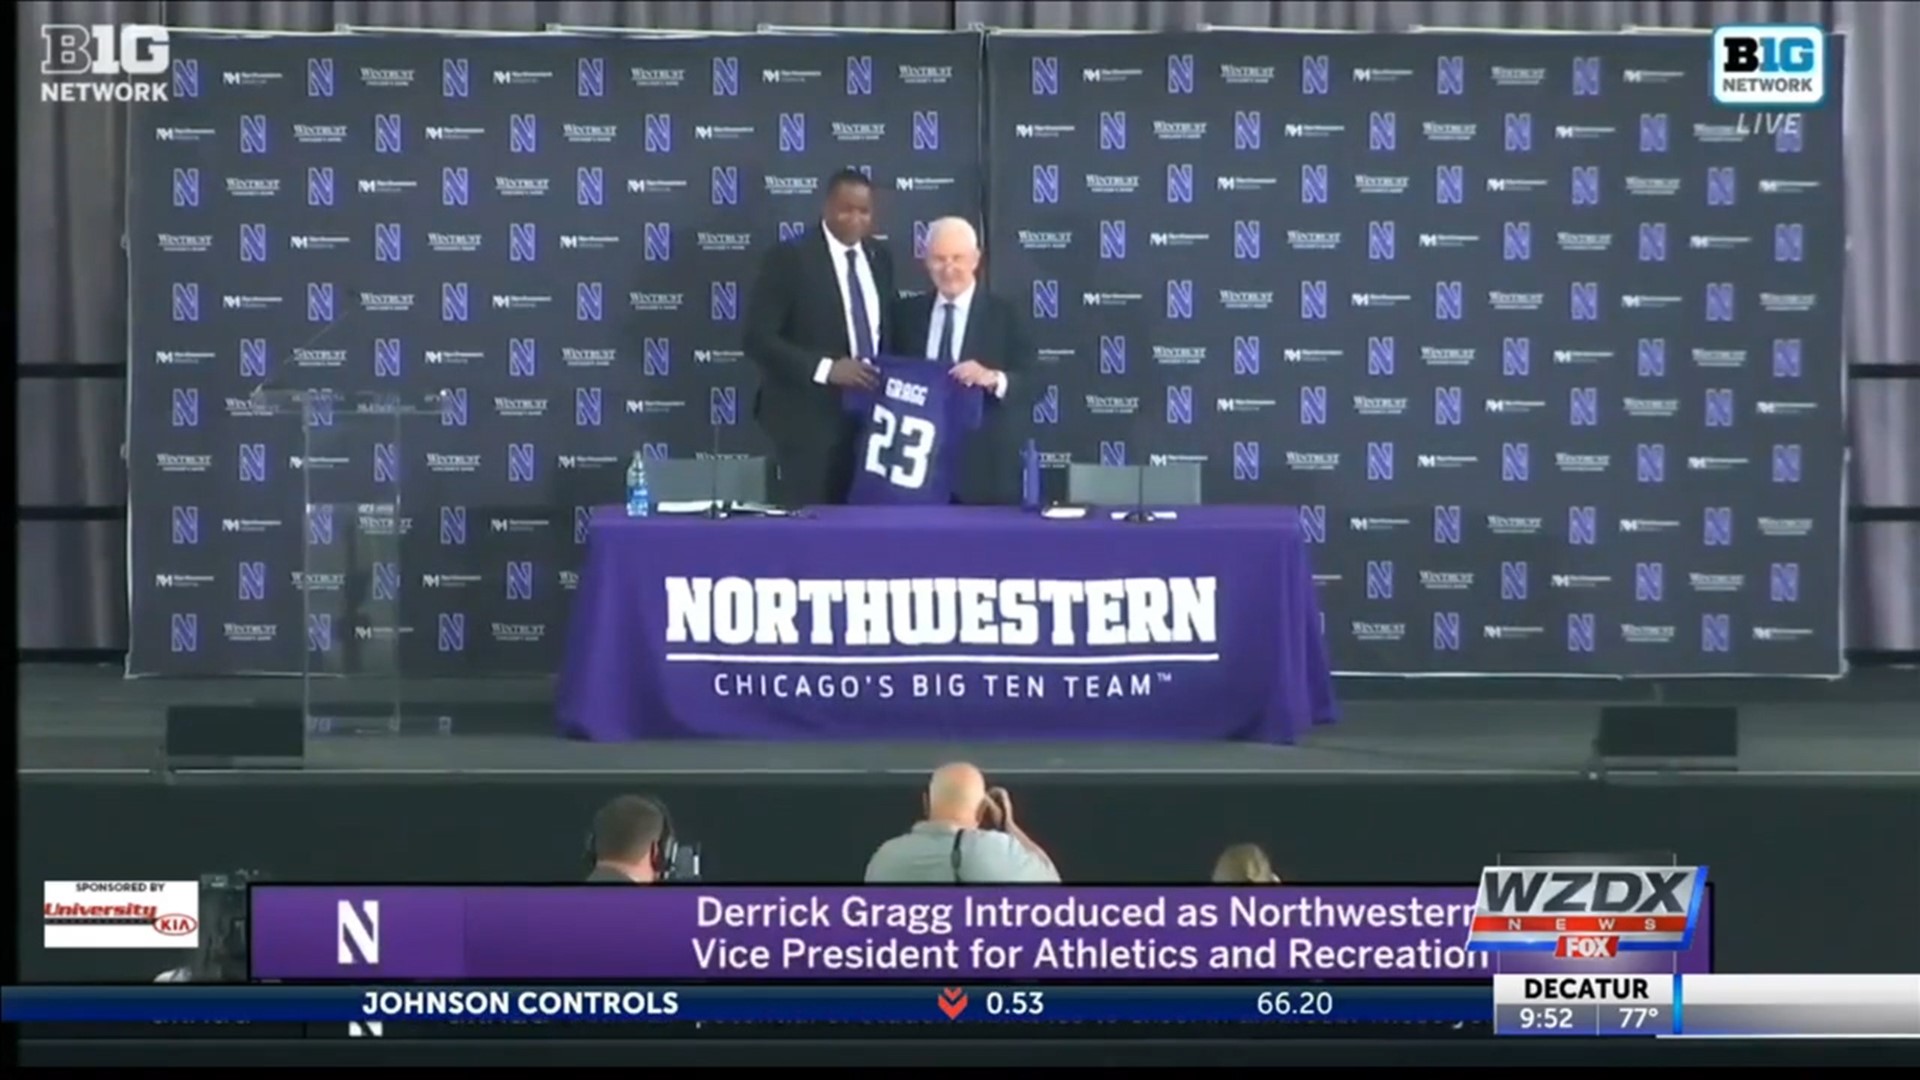 Northwestern has hired NCAA executive Derrick Gragg as its athletic director. He will replace Jim Phillips, who left Northwestern last year.